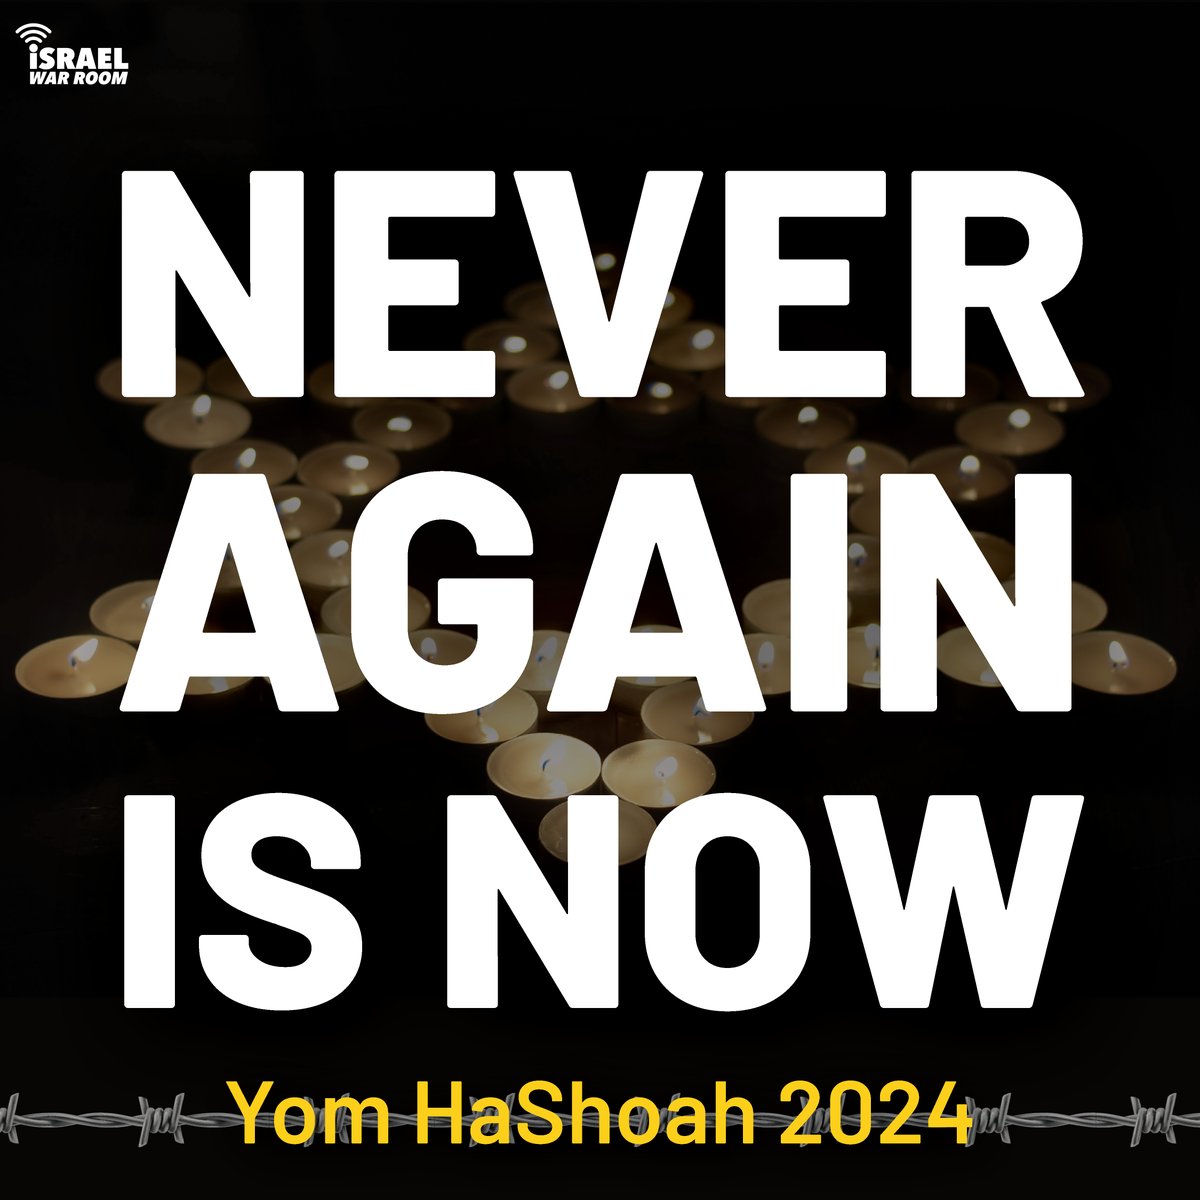 Today is Yom HaShoah — Holocaust Remembrance Day. In the shadow of the October 7 massacre and the drastic increase in global antisemitism, this year Yom HaShoah takes on added meaning. The Jewish people survived the Holocaust. We will survive now too. #NeverAgainIsNow